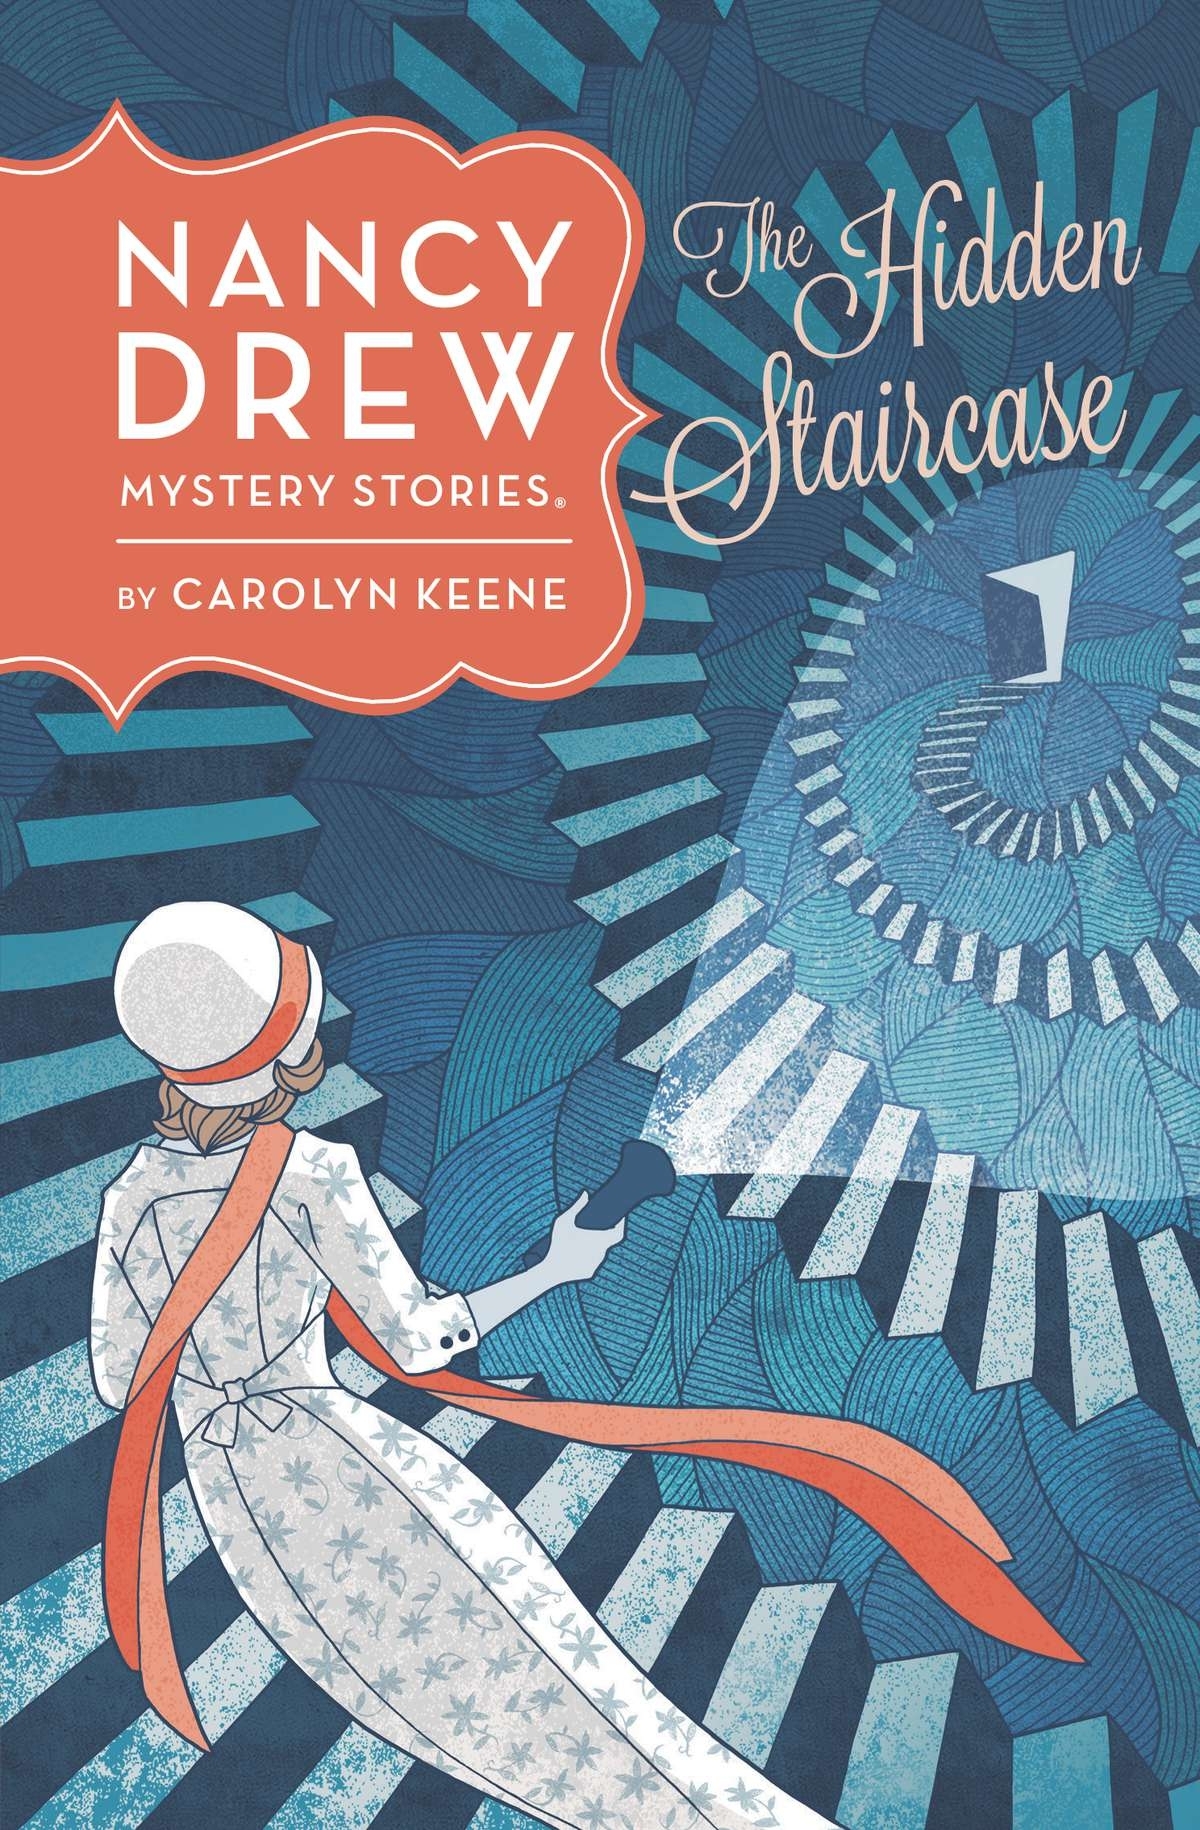 Nancy drew and the hidden staircase